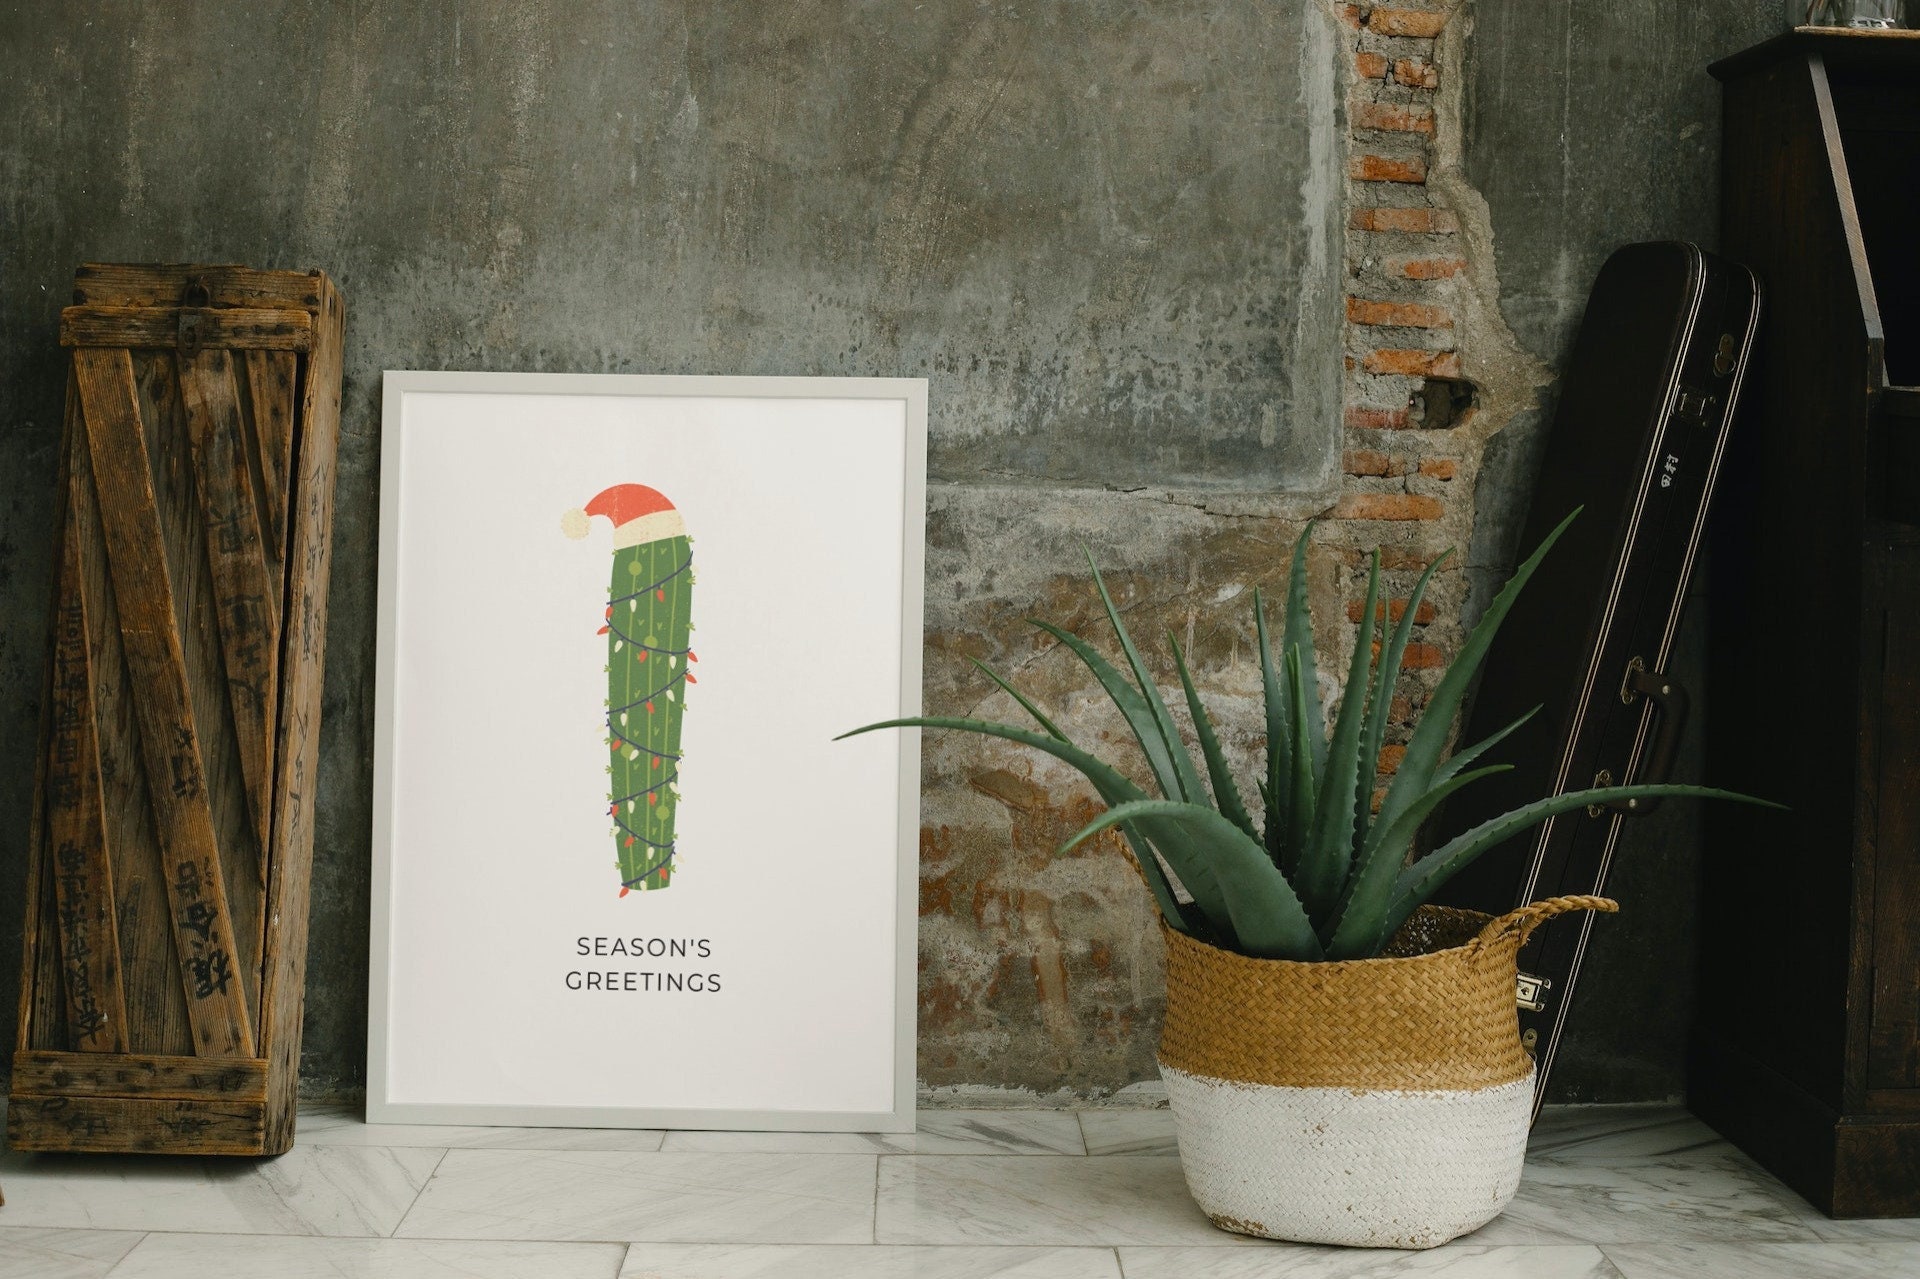 Merry Cactus Christmas Cactus in Santa Hat Poster for Sale by Lakisha's  Design